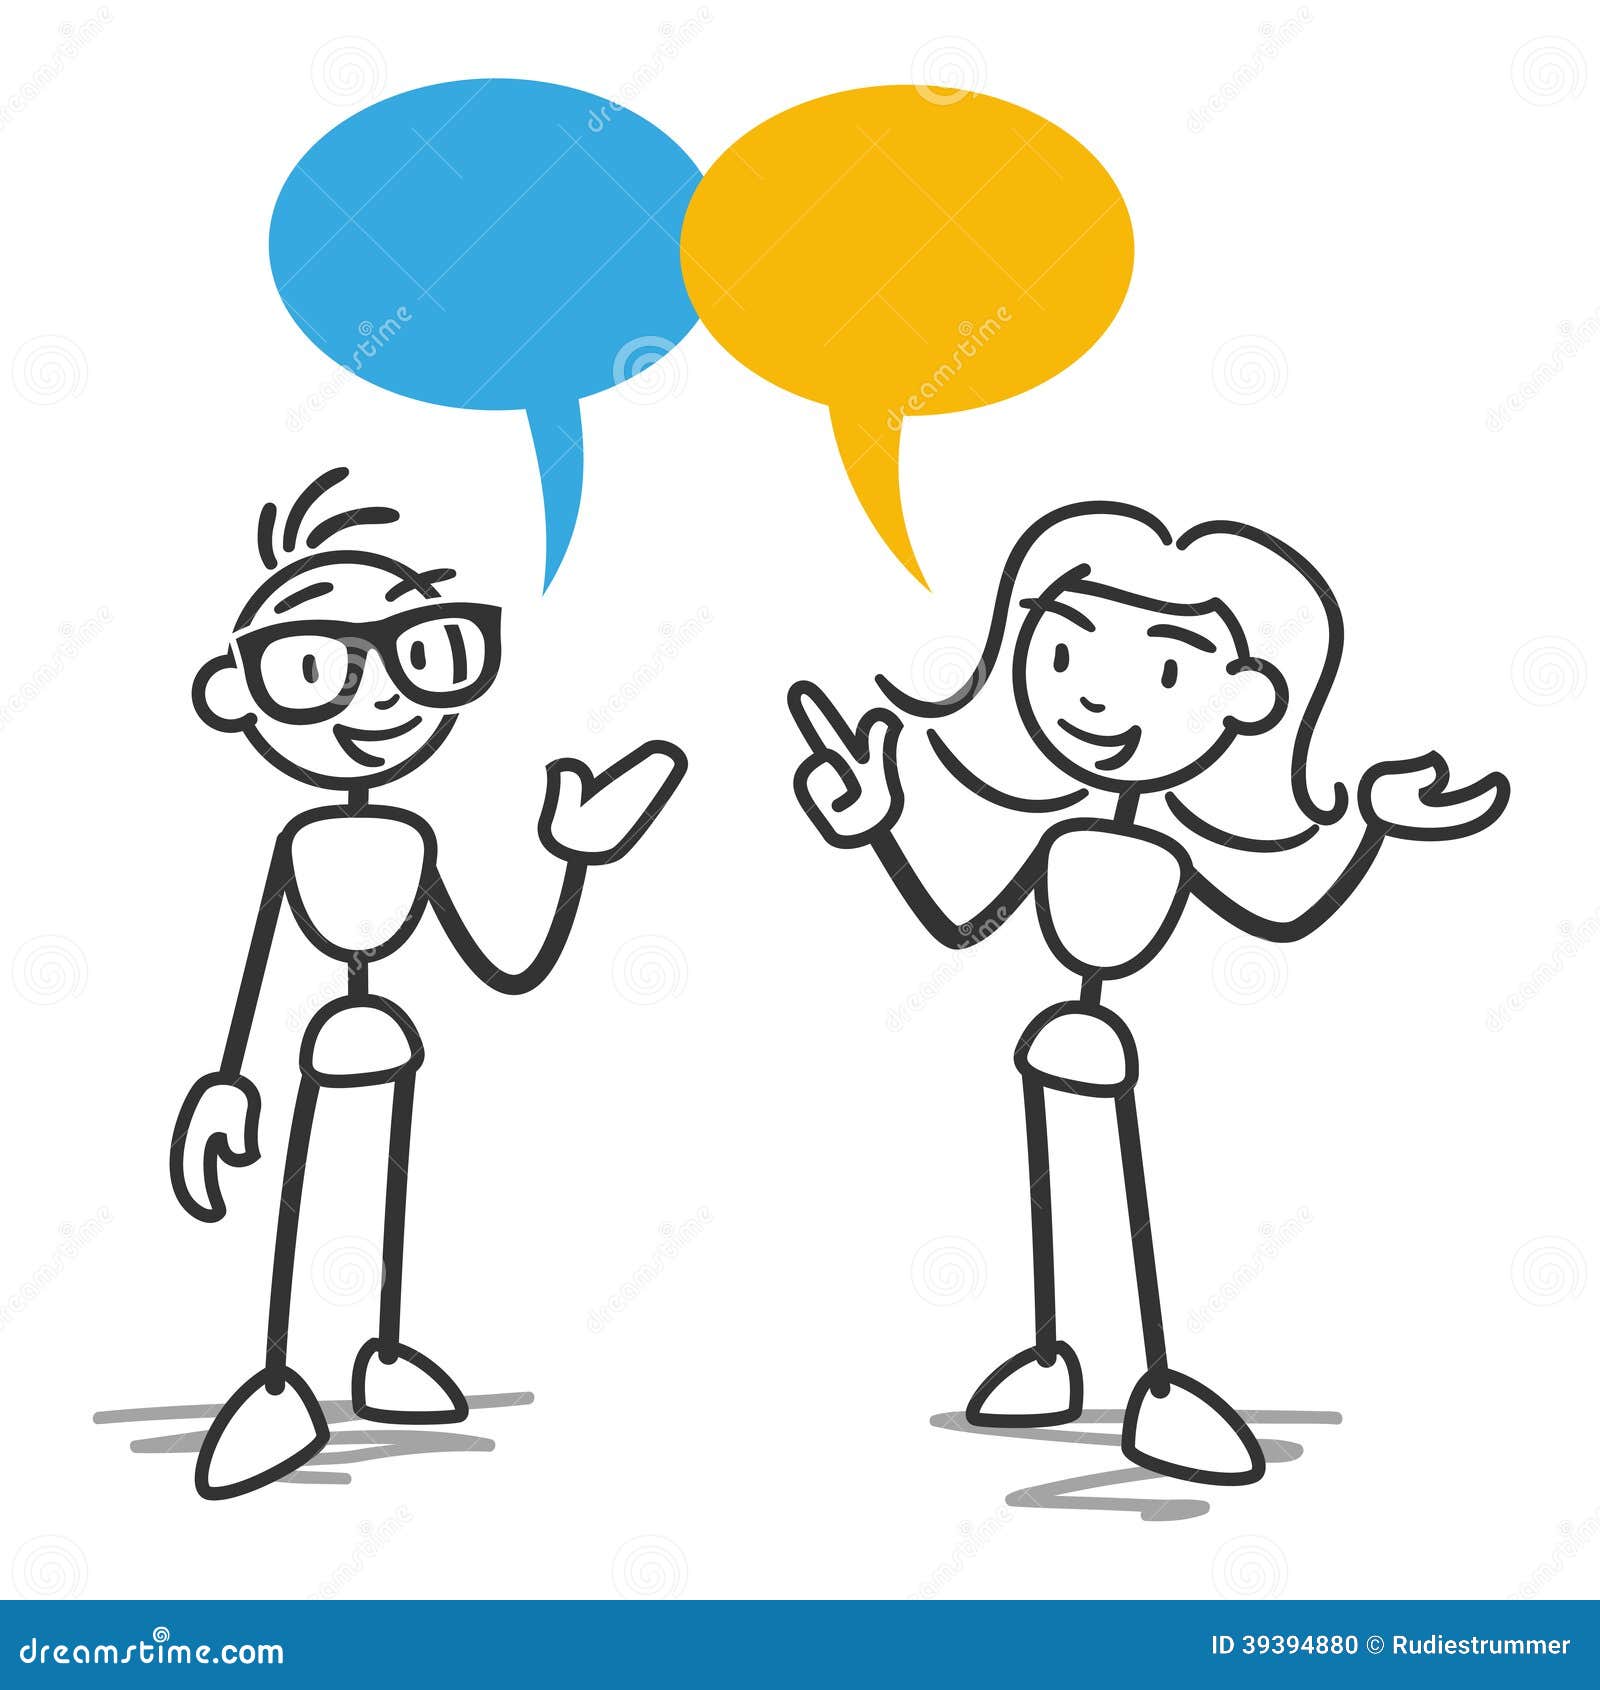 clipart man and woman talking - photo #37